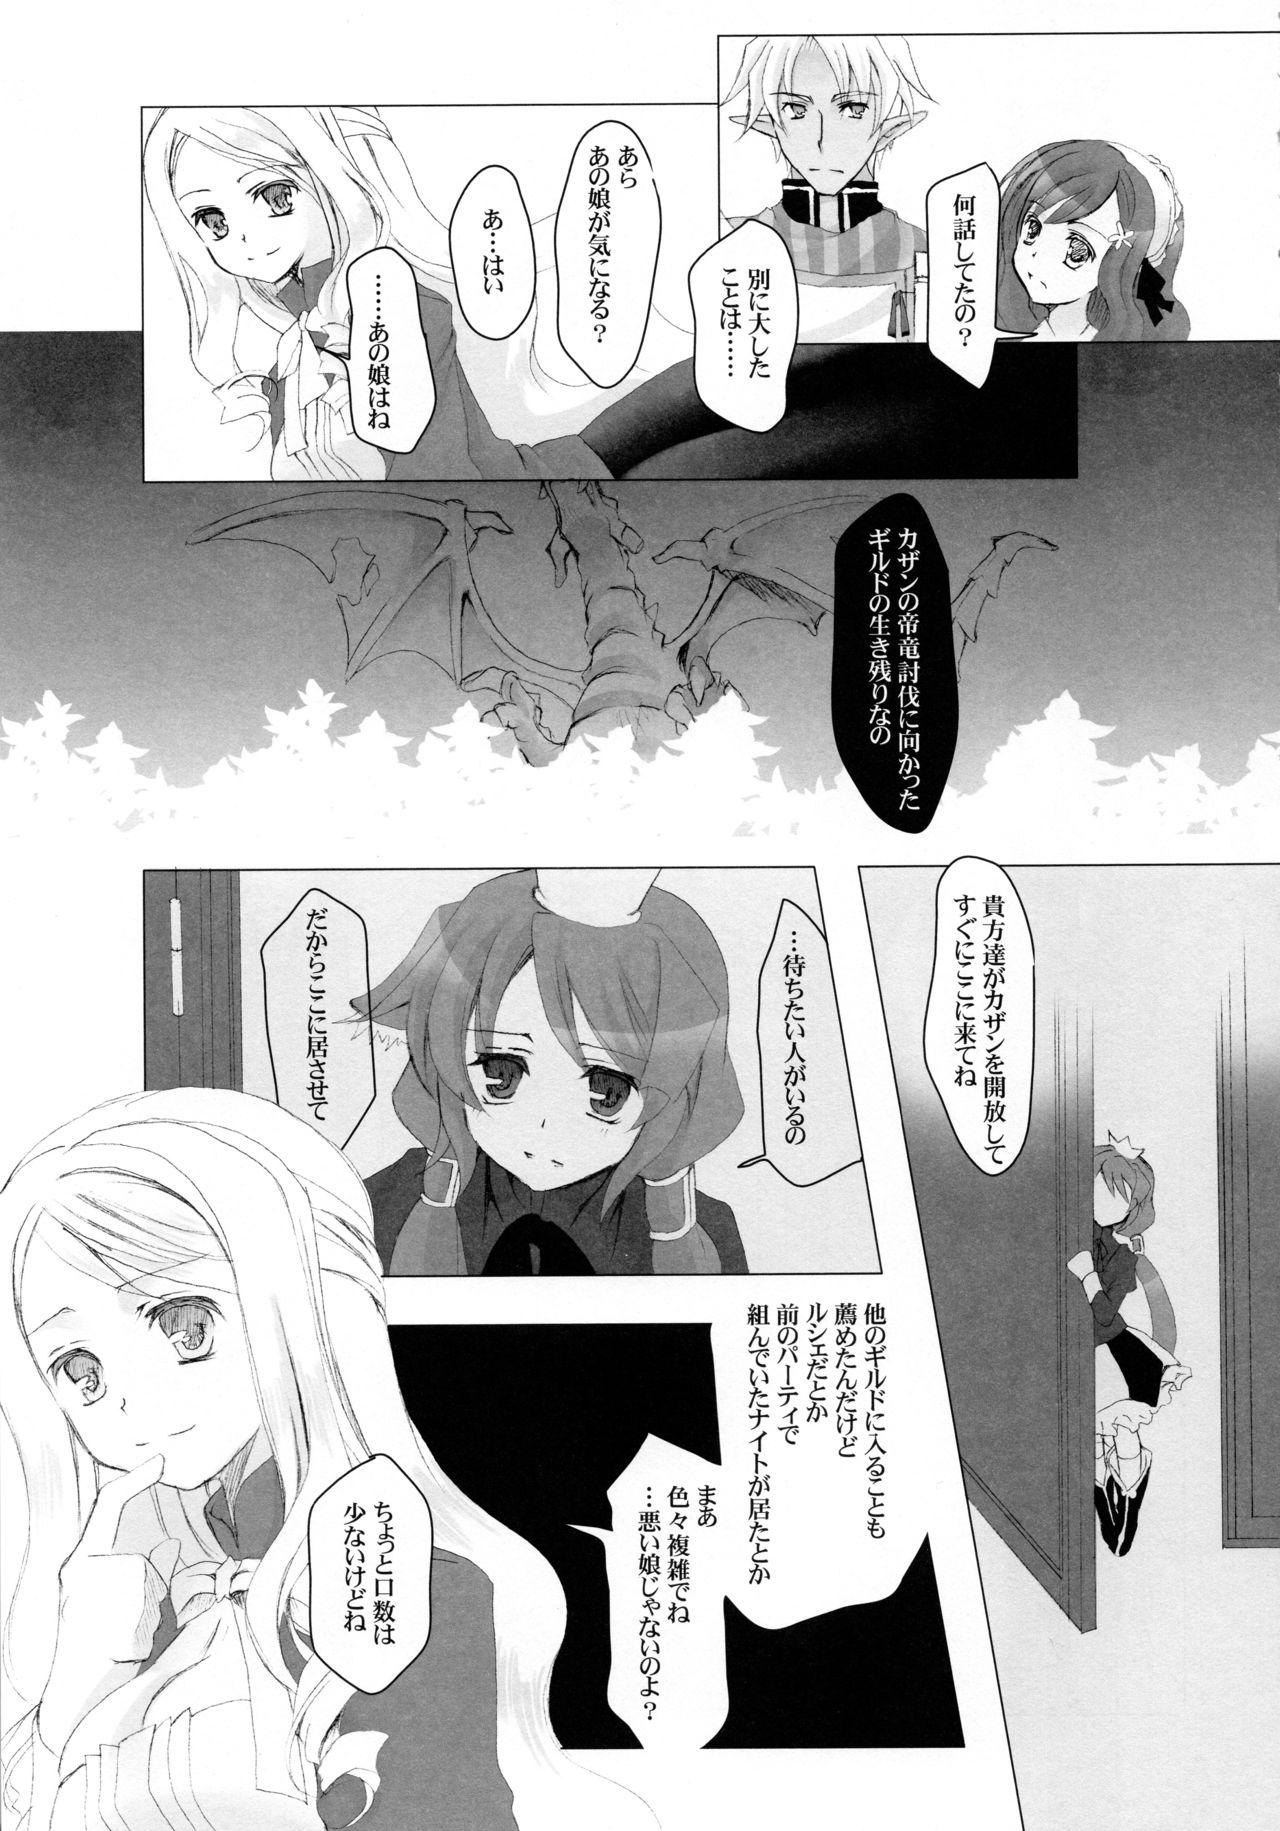 Masturbates Save the Queen - 7th dragon Leaked - Page 4